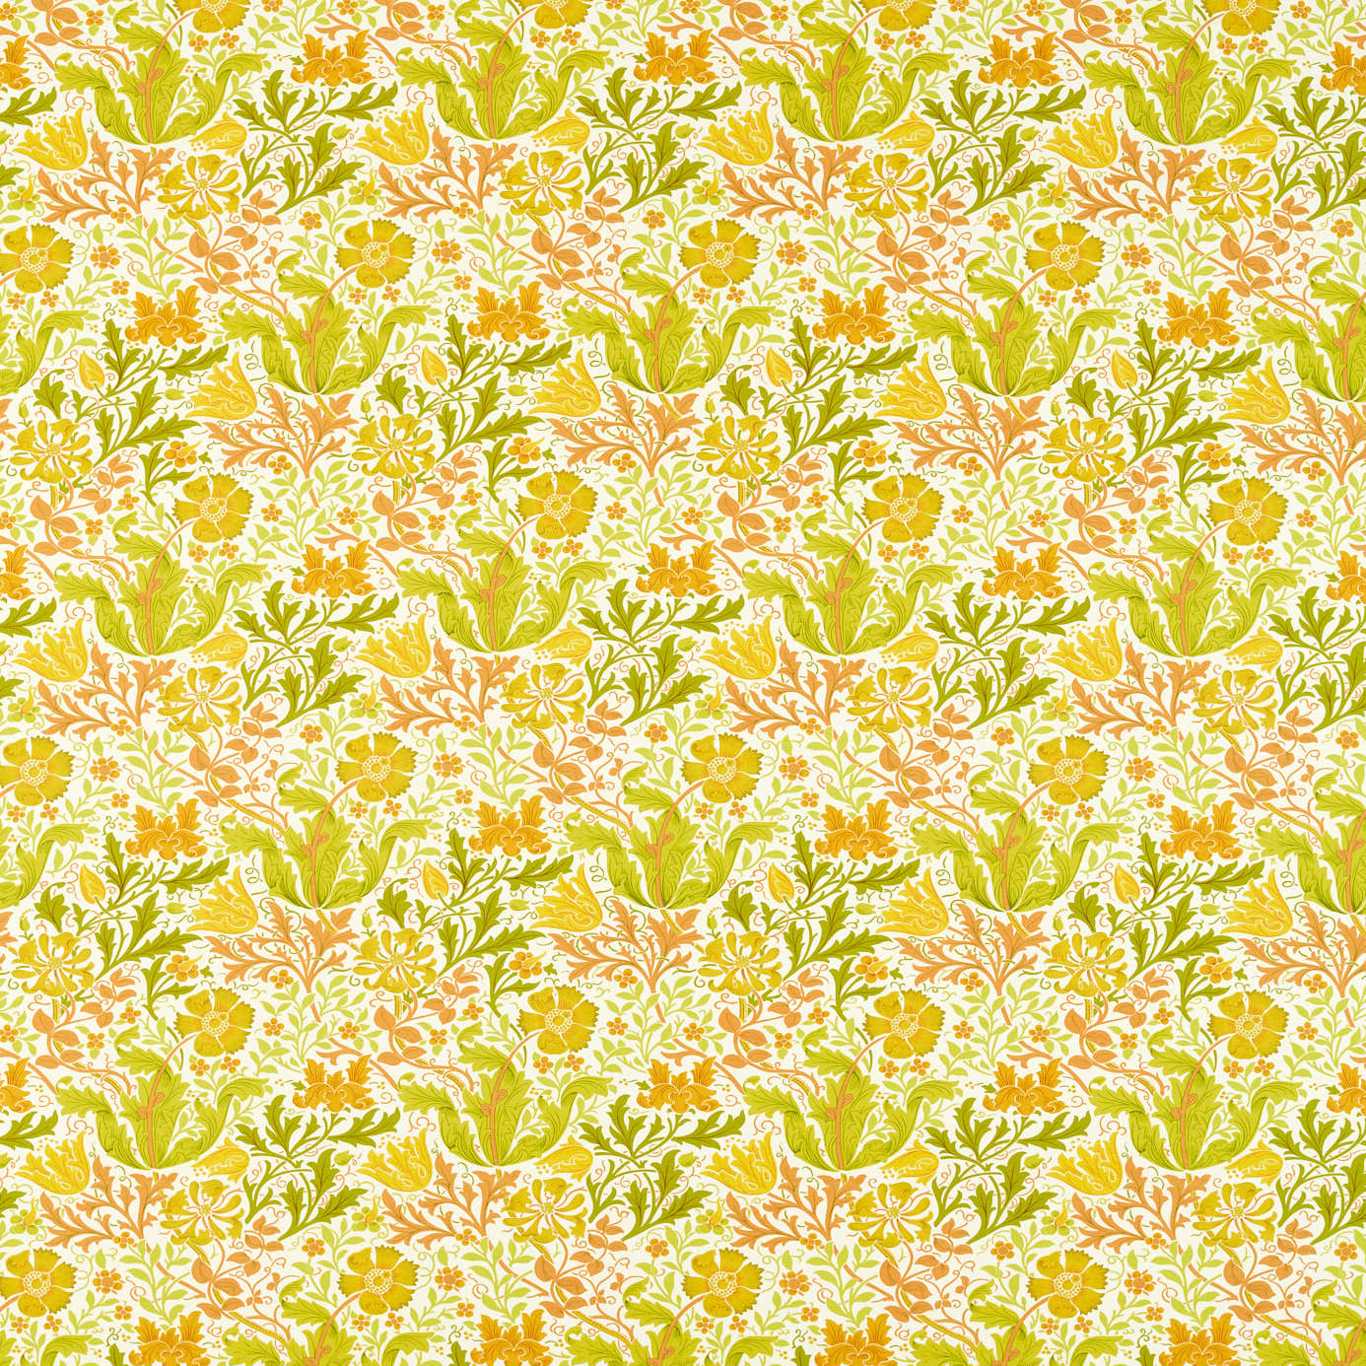 Compton Fabric by Morris & Co. - MCOP226989 - Summer Yellow